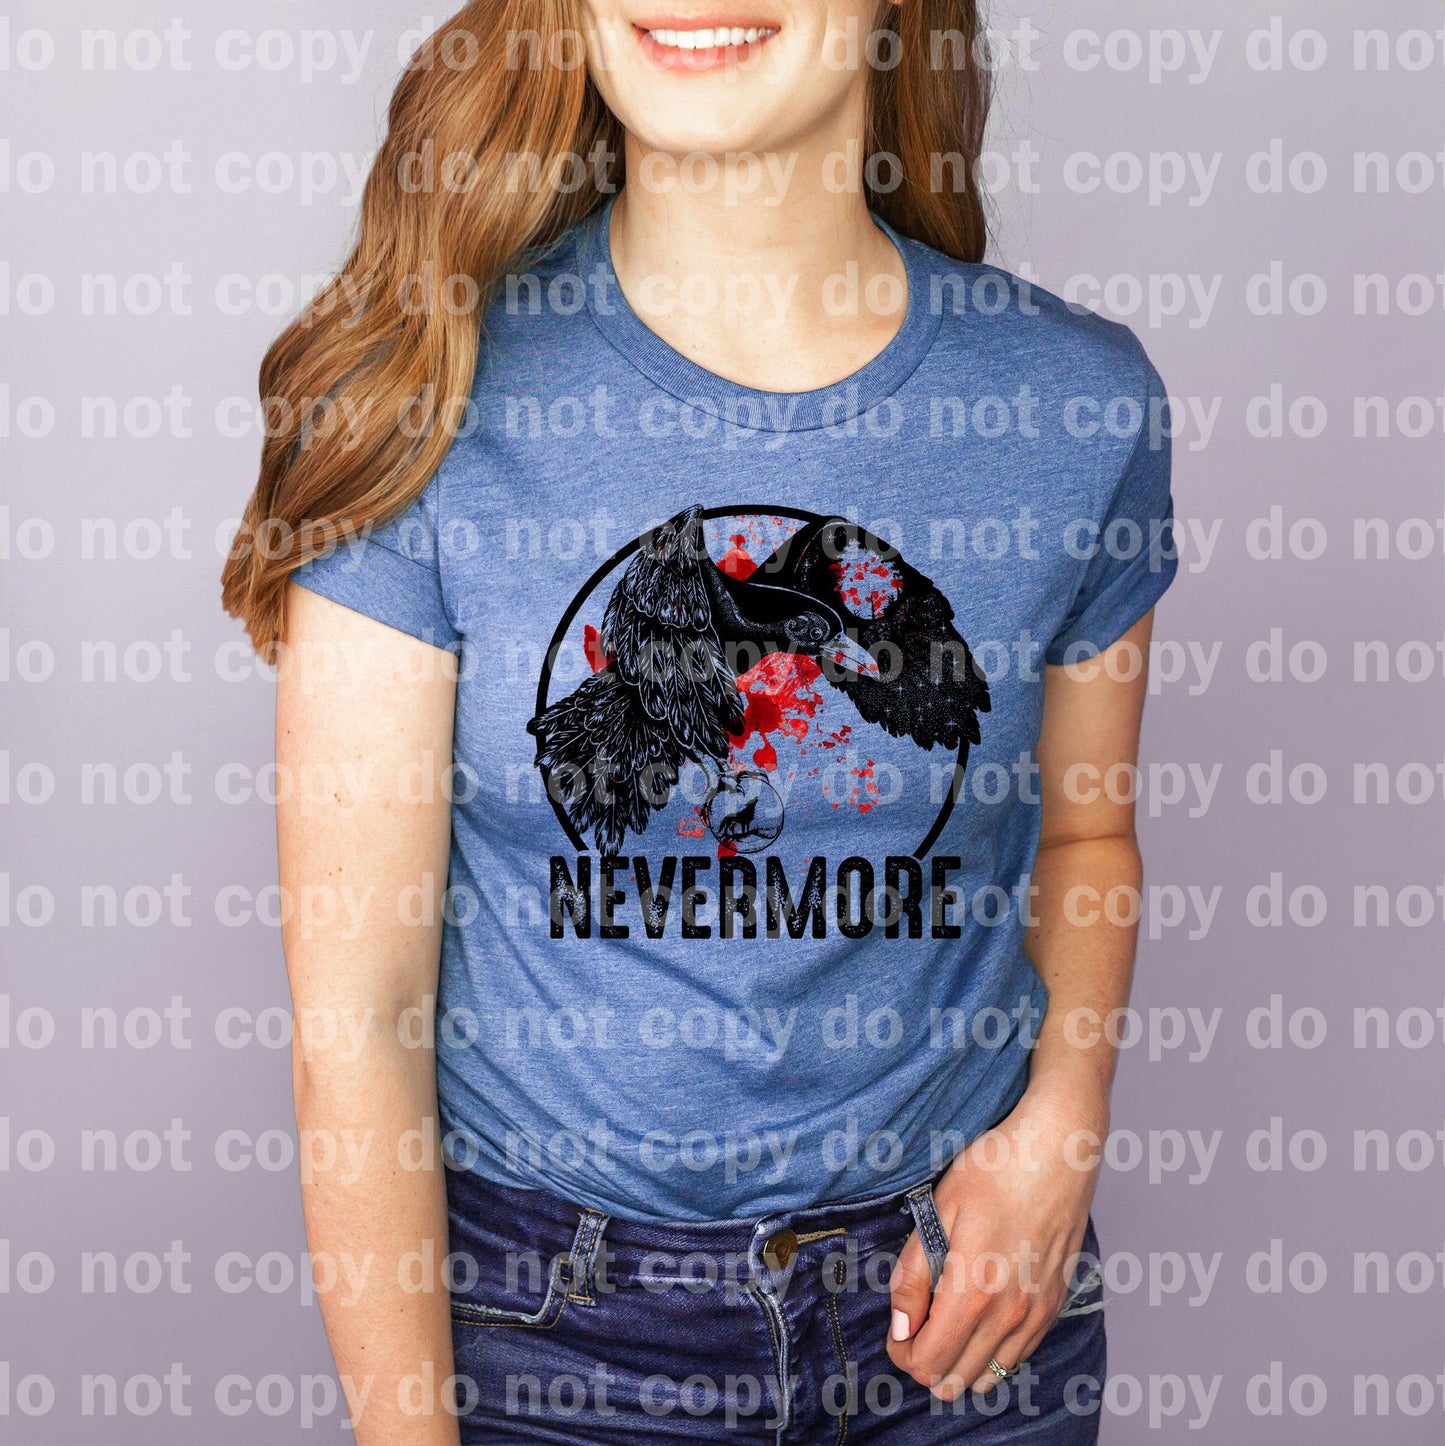 Nevermore Eagle Wolf Dream Print or Sublimation Print